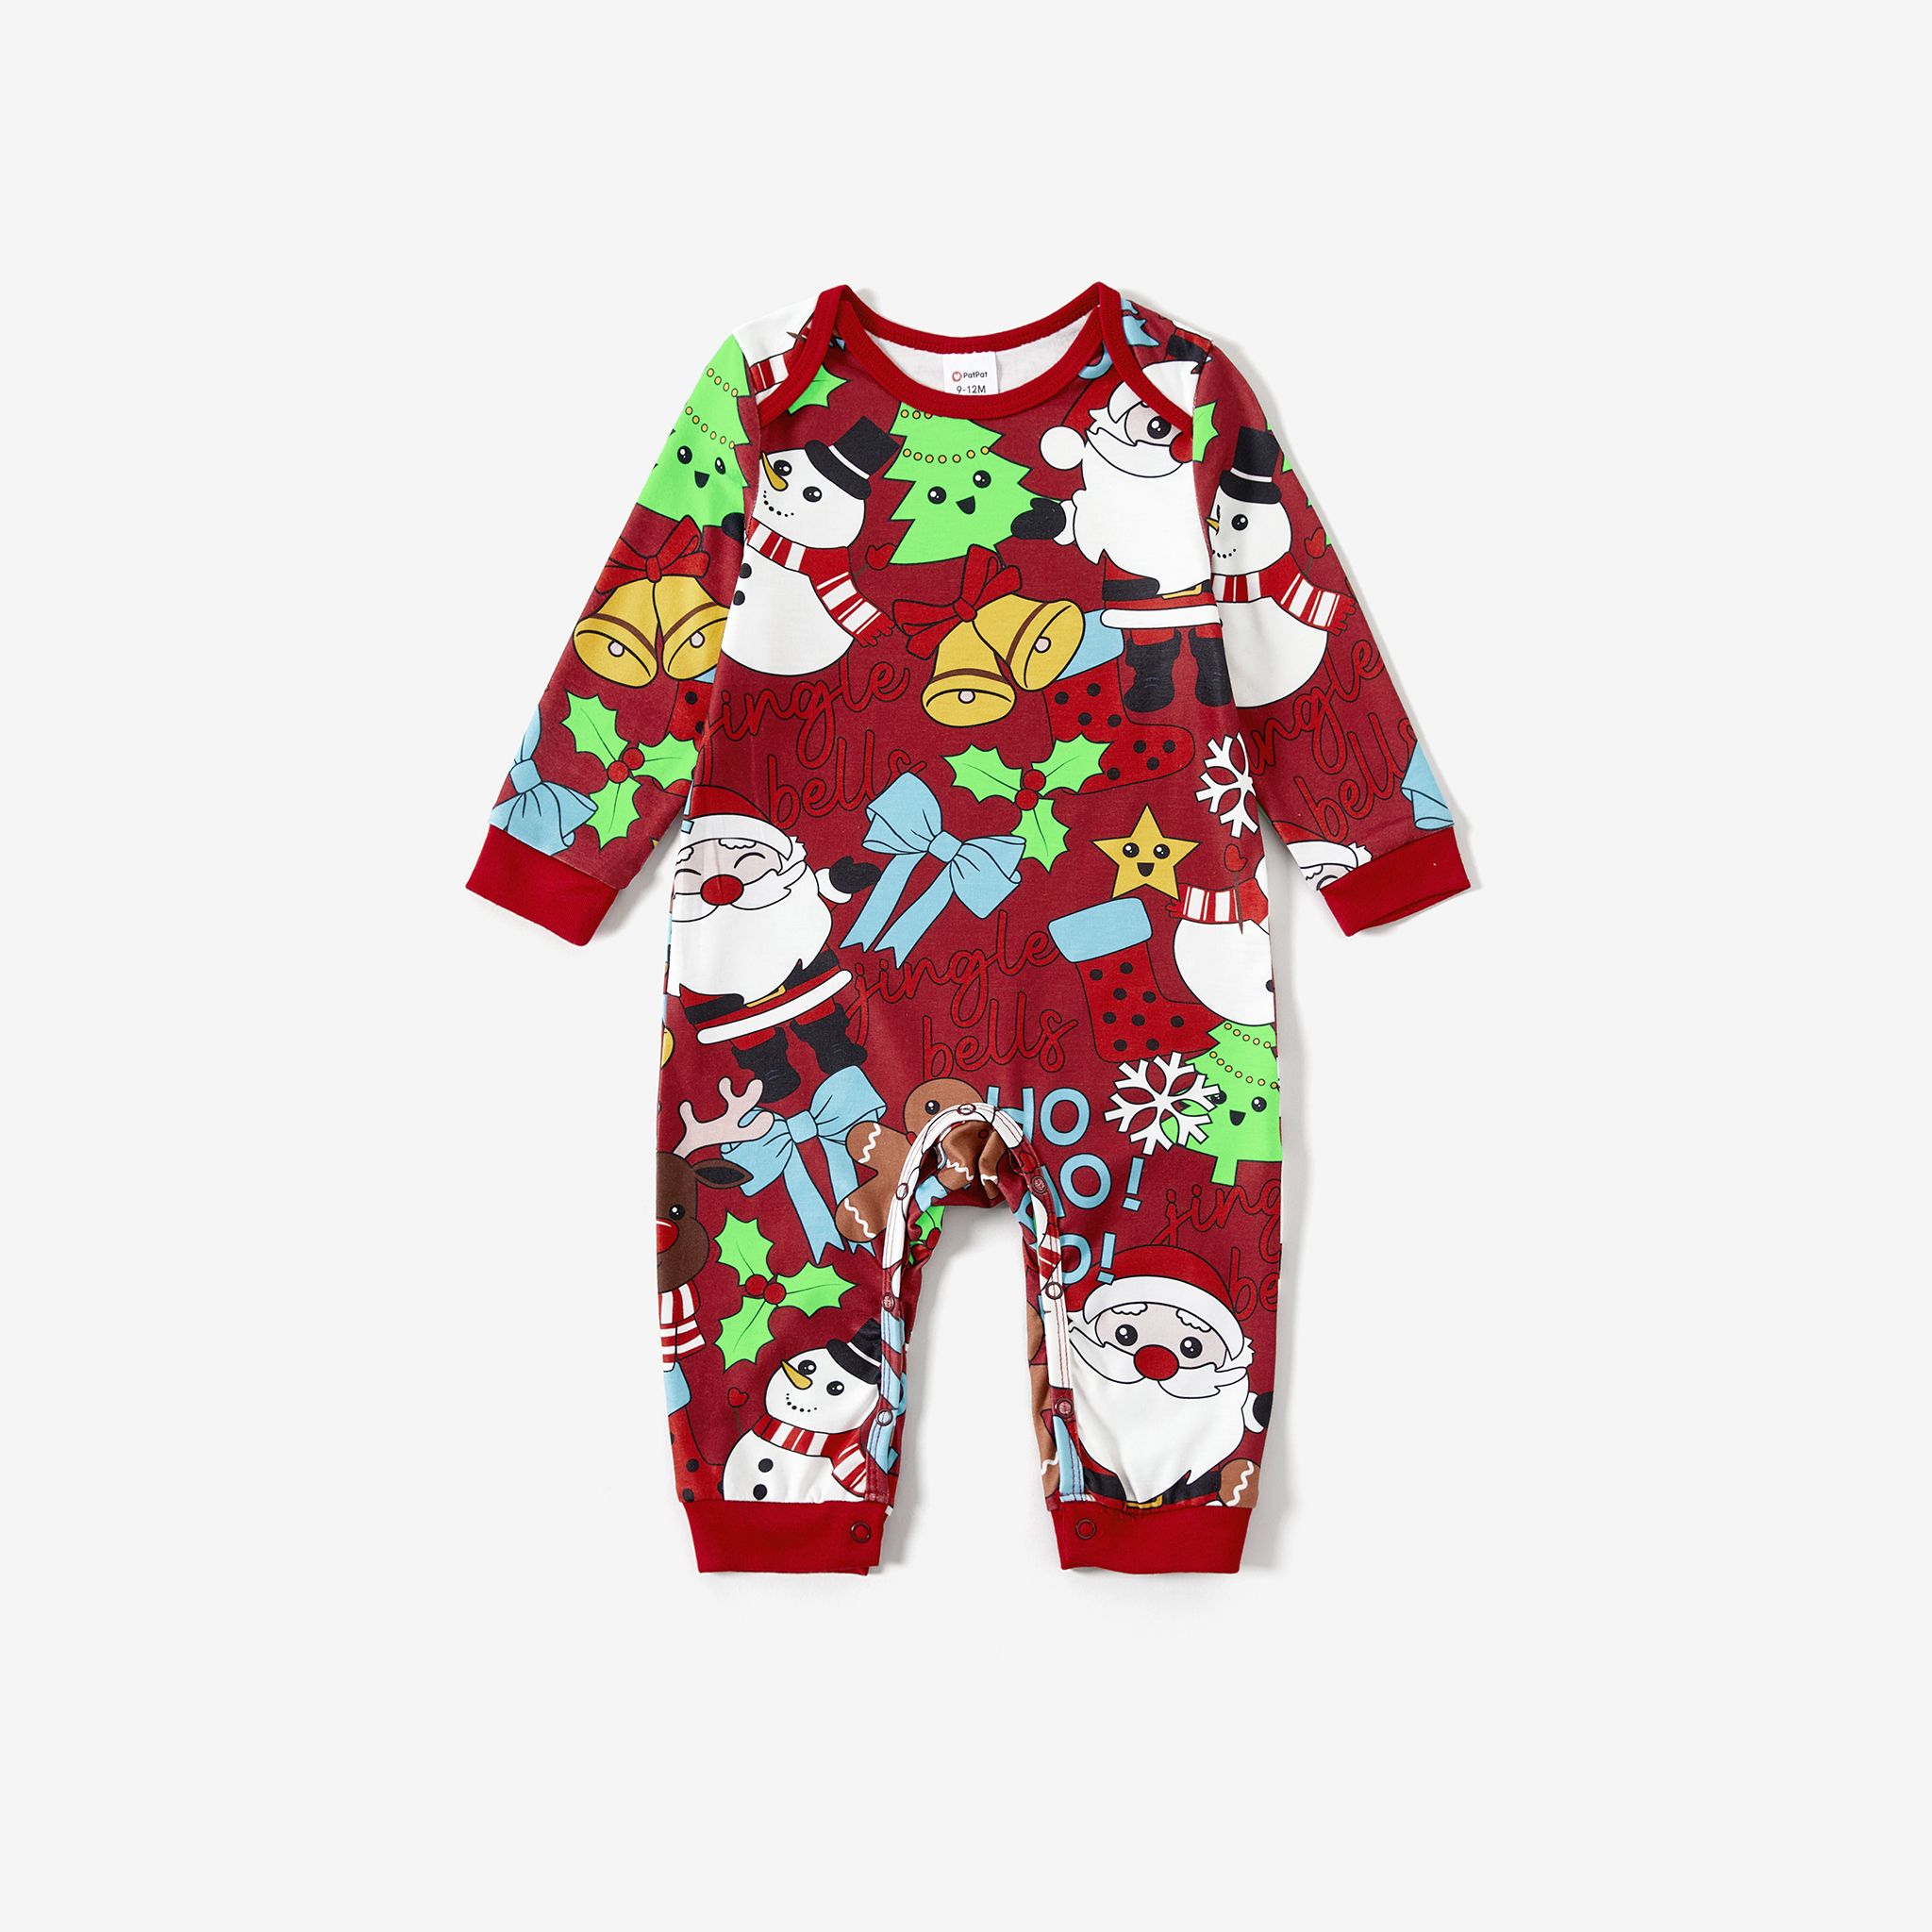 Christmas Family Matching Glow In The Dark Childlike Festival Theme Print Long Sleeve Pajamas Sets(Flame Resistant)